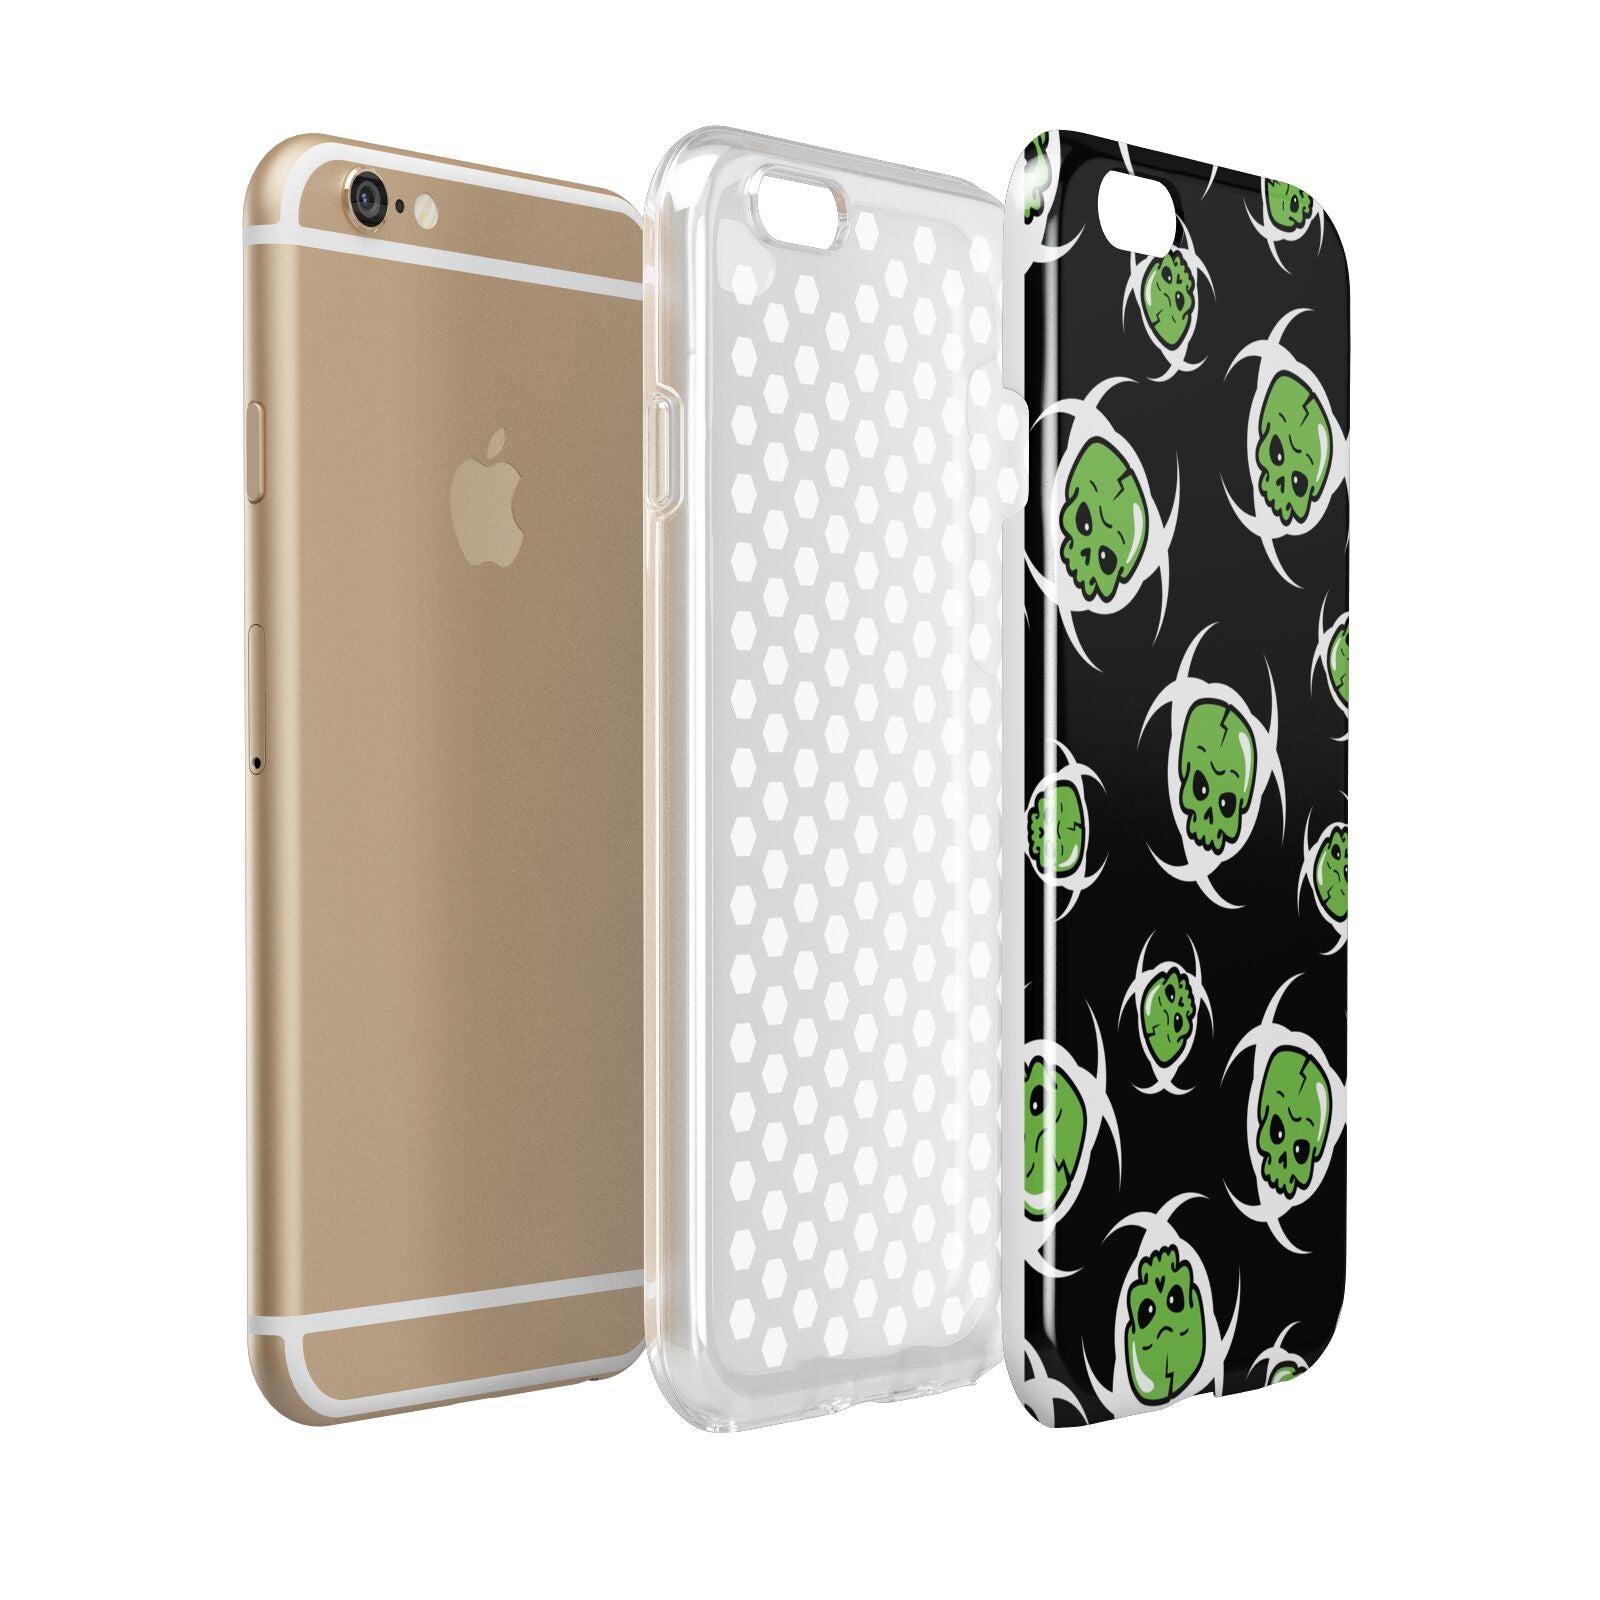 Toxic Skulls Apple iPhone 6 3D Tough Case Expanded view